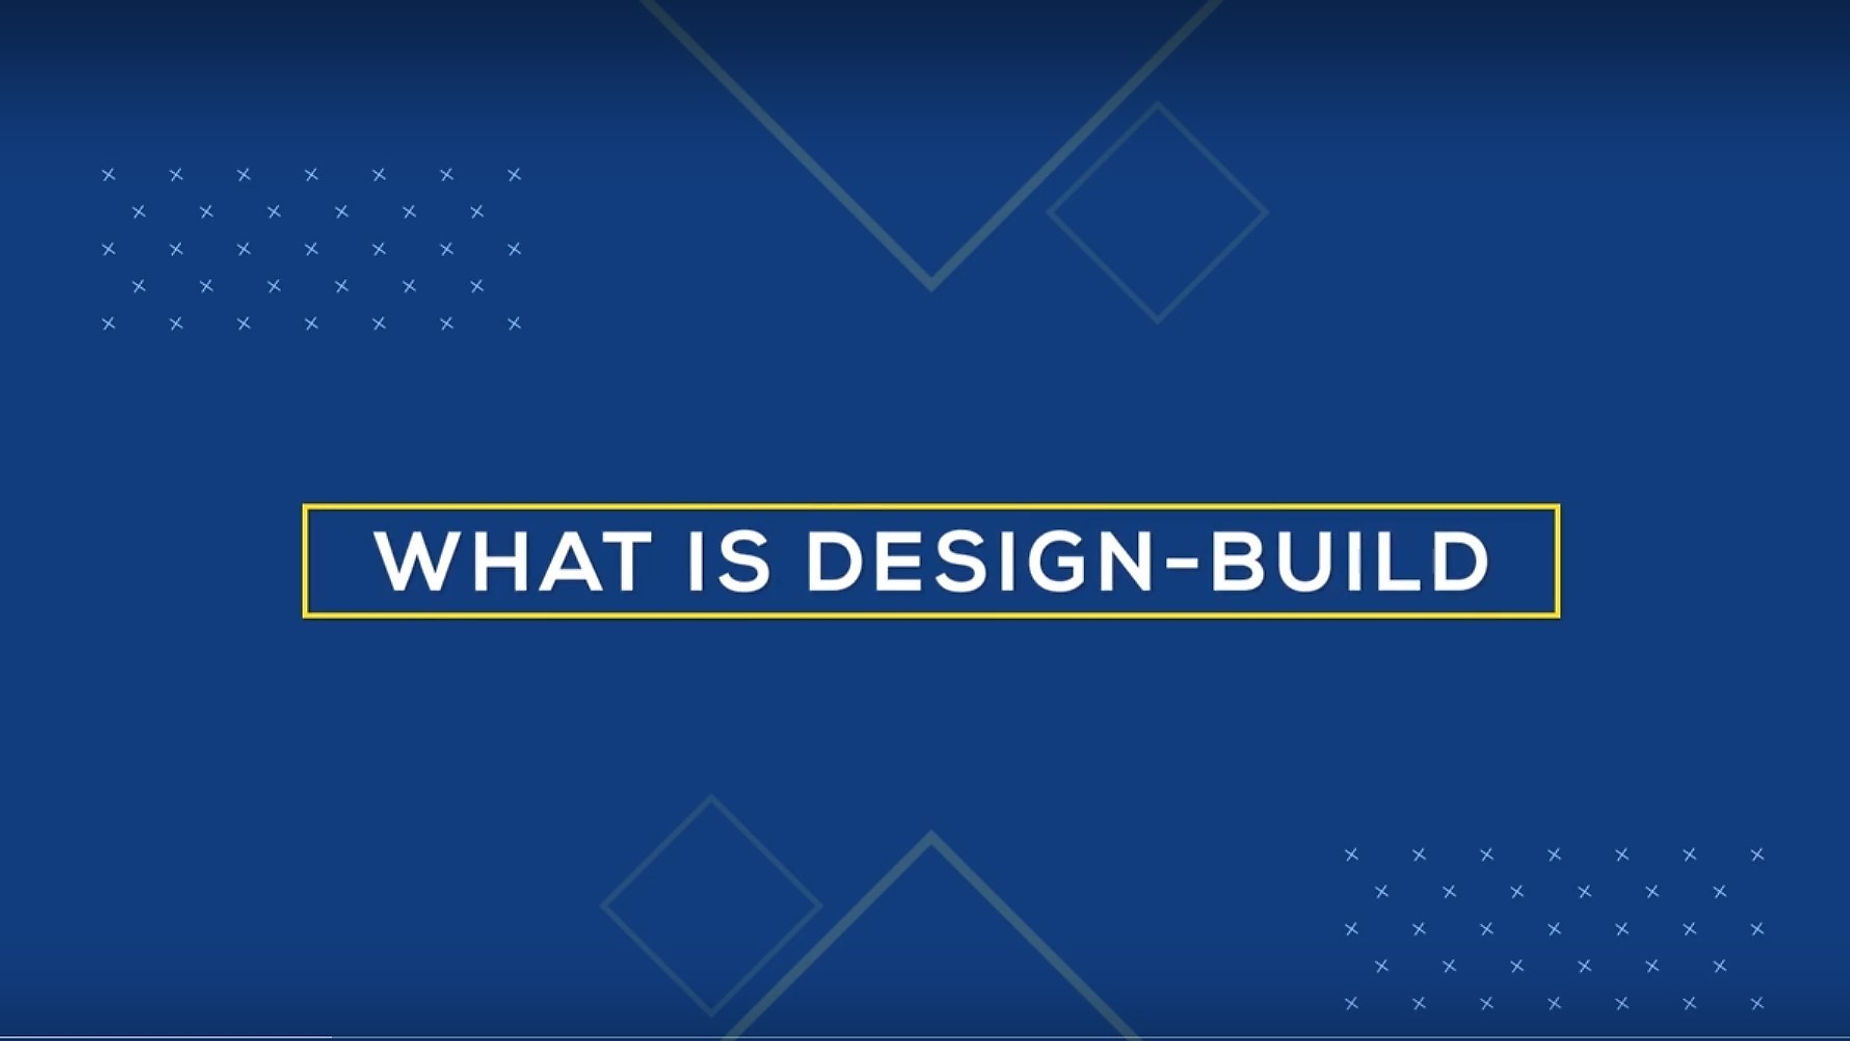 What is Design-Build